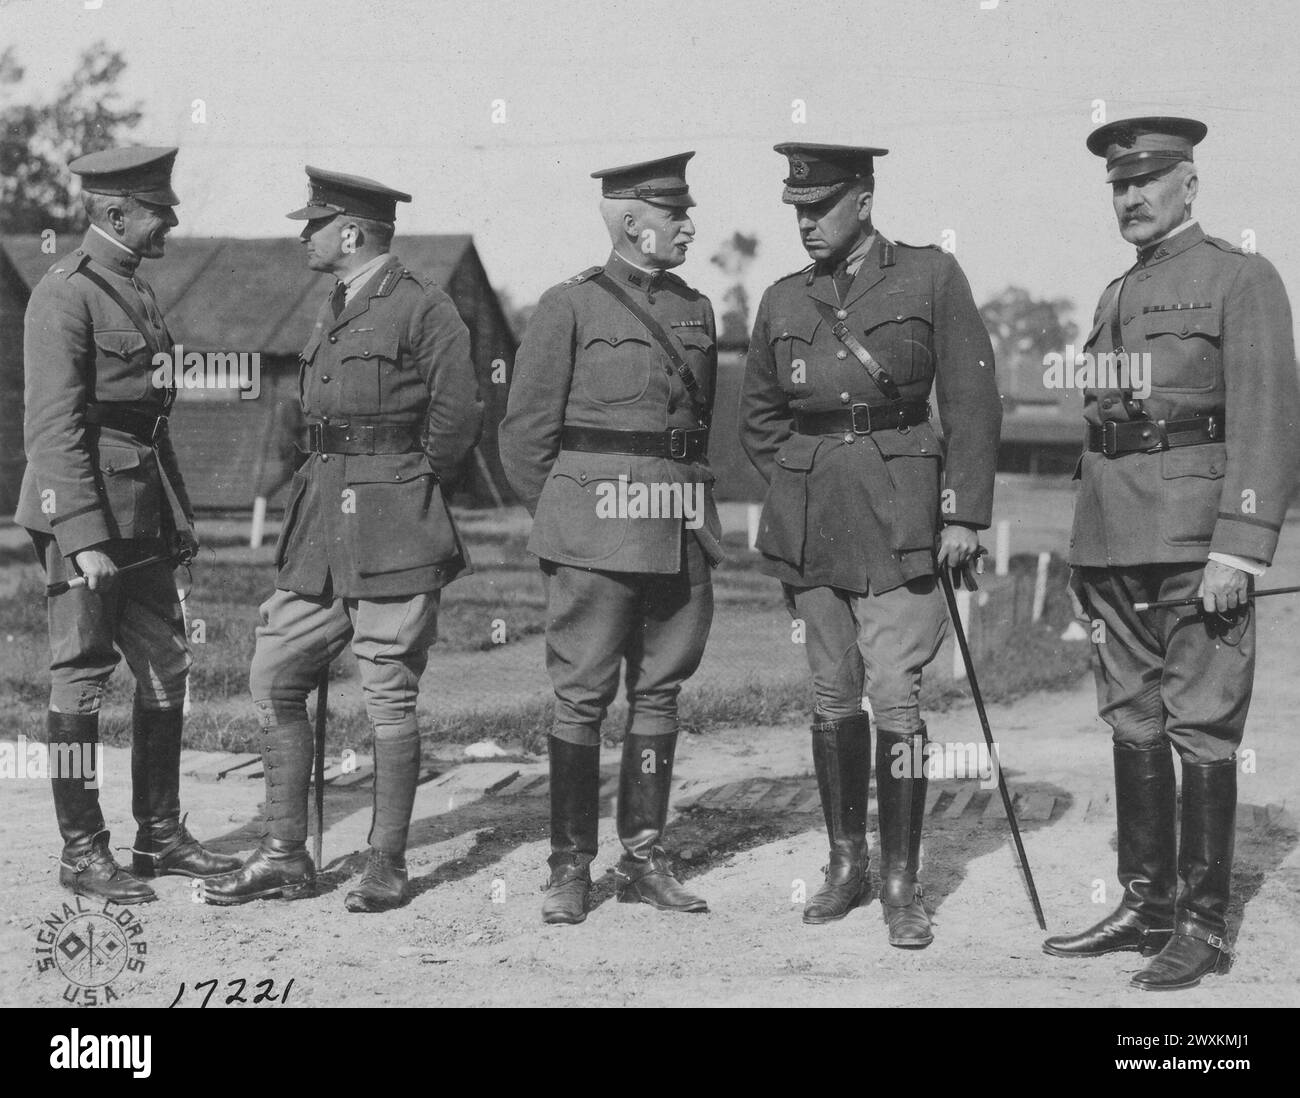 Five fighting generals: (L to R) Major General W.W. Hartz, General H.K. Bothell, Major General M. Lewis, General A.D. McRae, and Major General George W. Read ca. 1918 Stock Photo